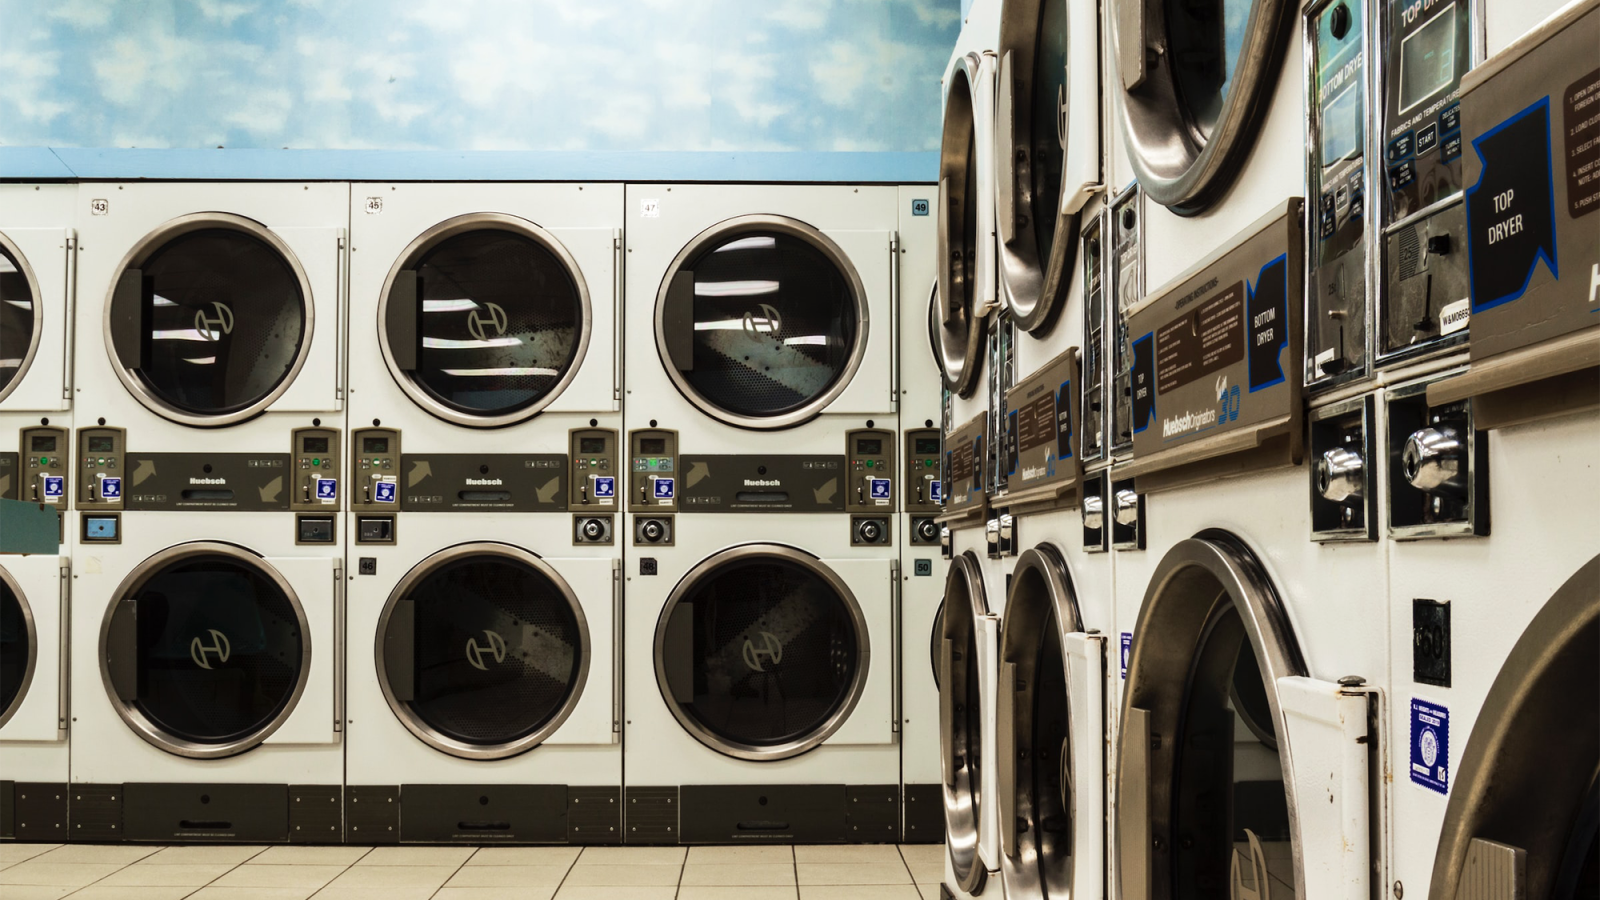 Washing machines stacked in two rows in a laundromat